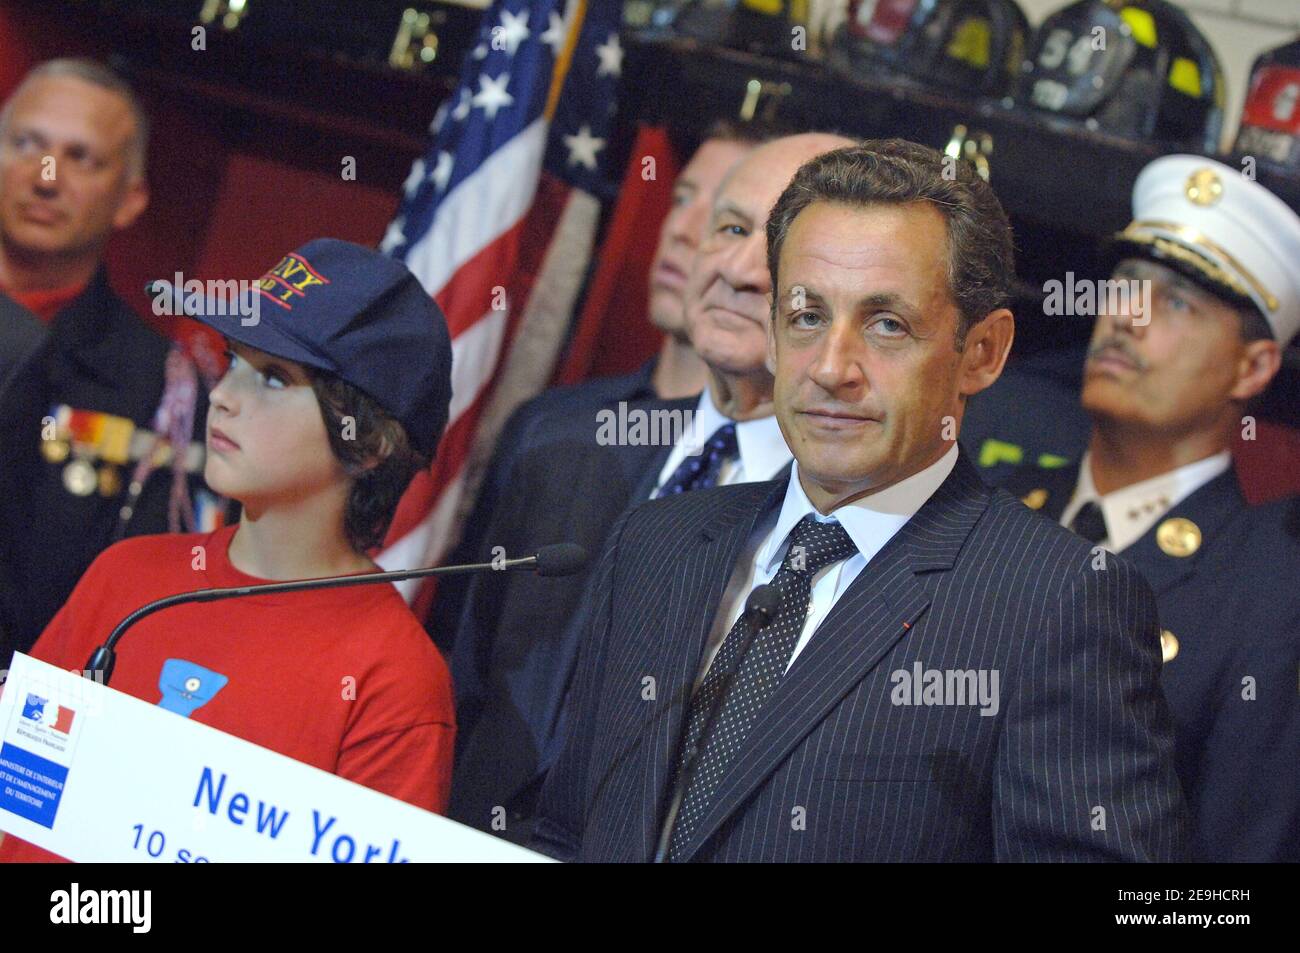 French interior minister Nicolas Sarkozy presents the Medal of Honor of french firefighters to FDNY, in New York City, NY, USA, on September 10, 2006. Standing next to him is Aidan Fontana, 10, who lost his father David on September 11, 2001. Photo by Lionel Hahn/ABACAPRESS.COM Stock Photo